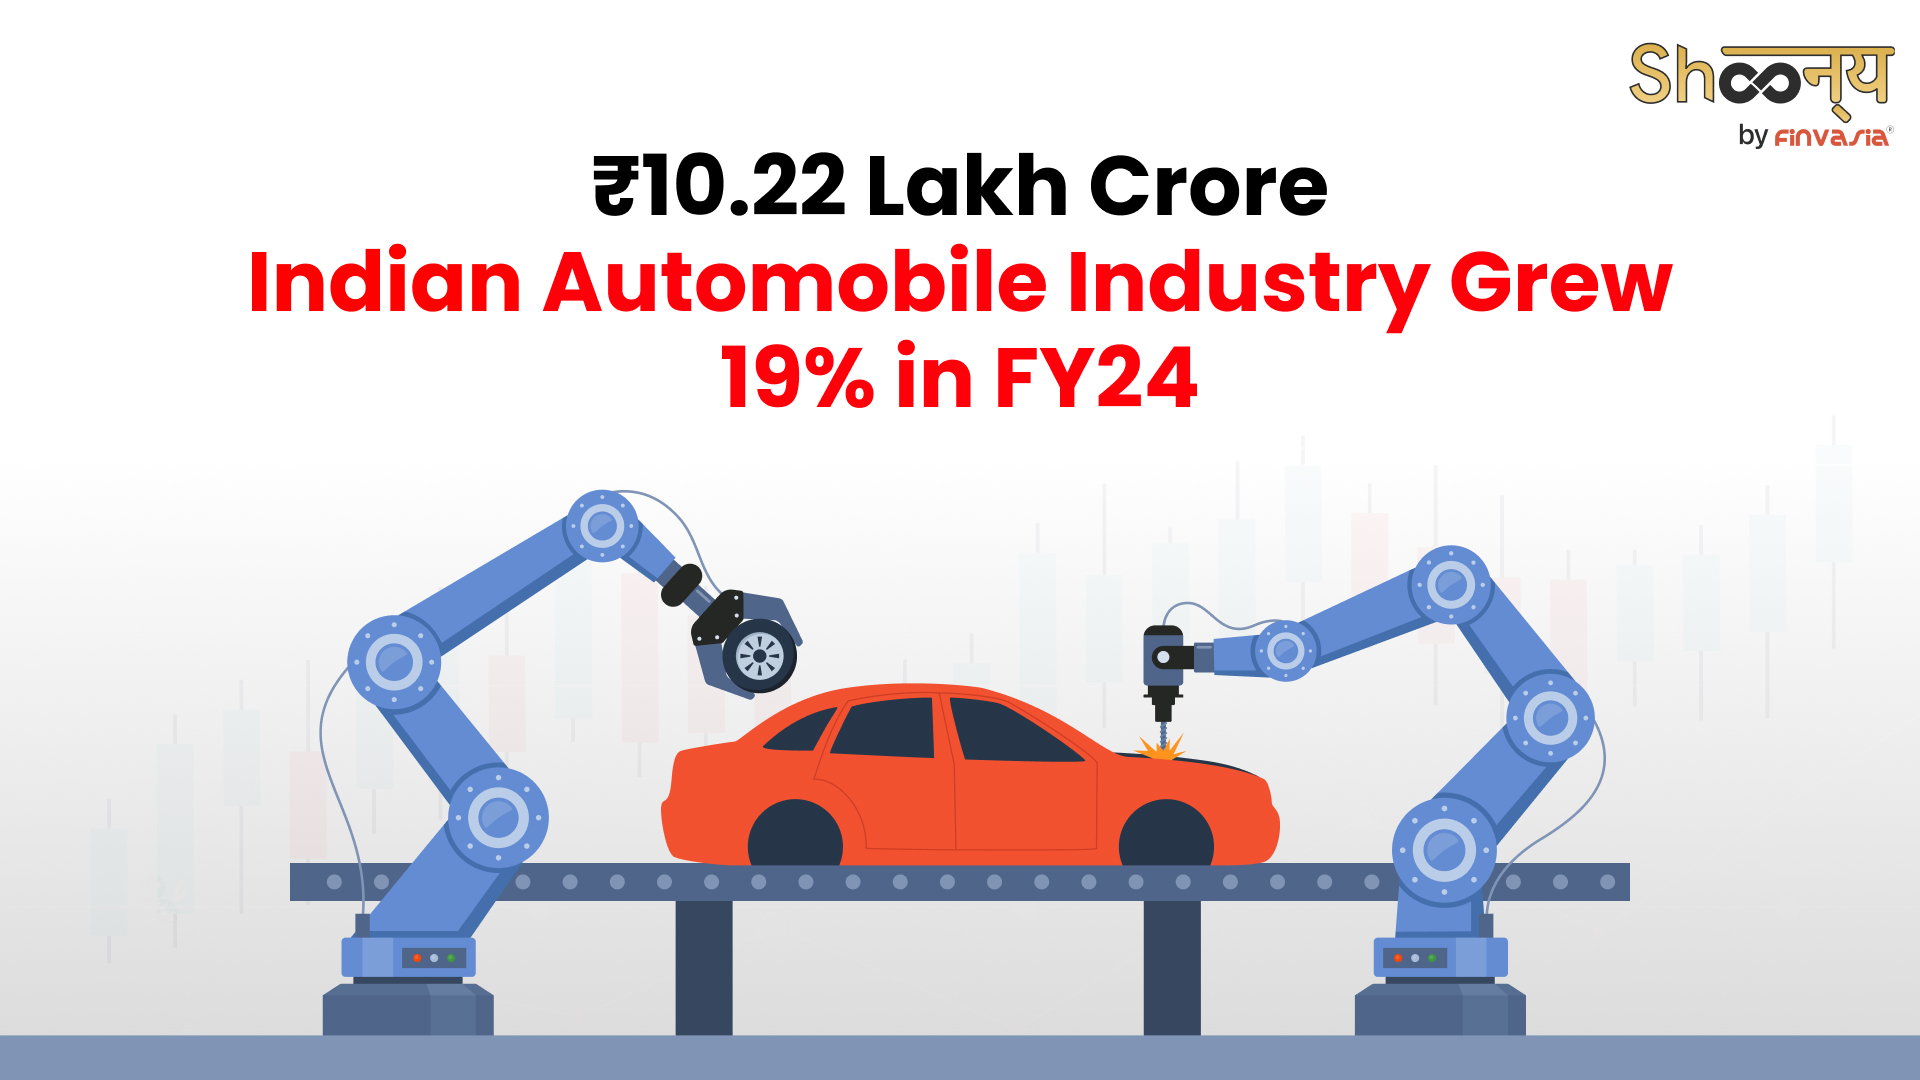 
  Indian Automobile Industry Grew By 19% in FY24 to Reach ₹ 10.22 Lakh Crore